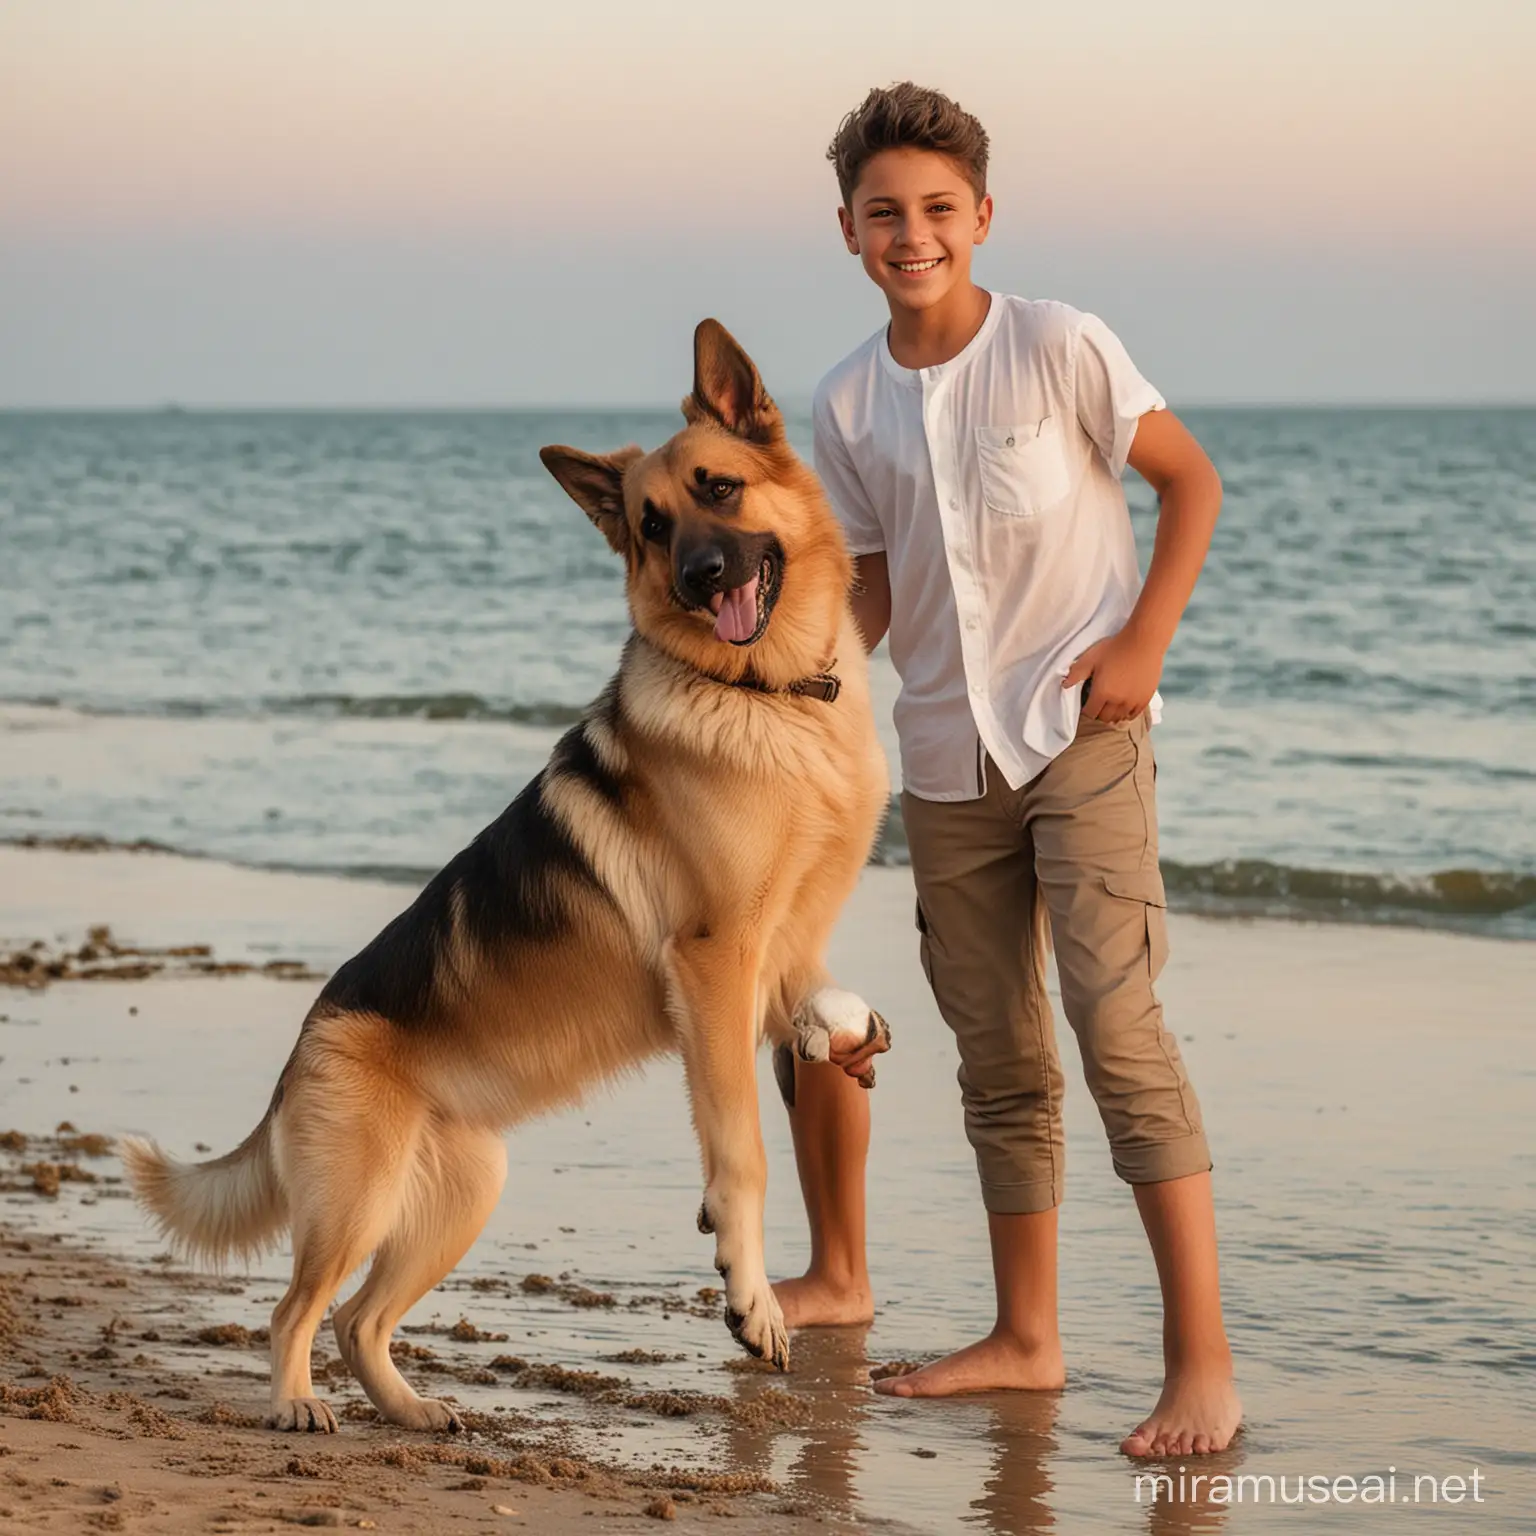 Young Boy Playing with German Shepherd Dog on Beach at Sunset